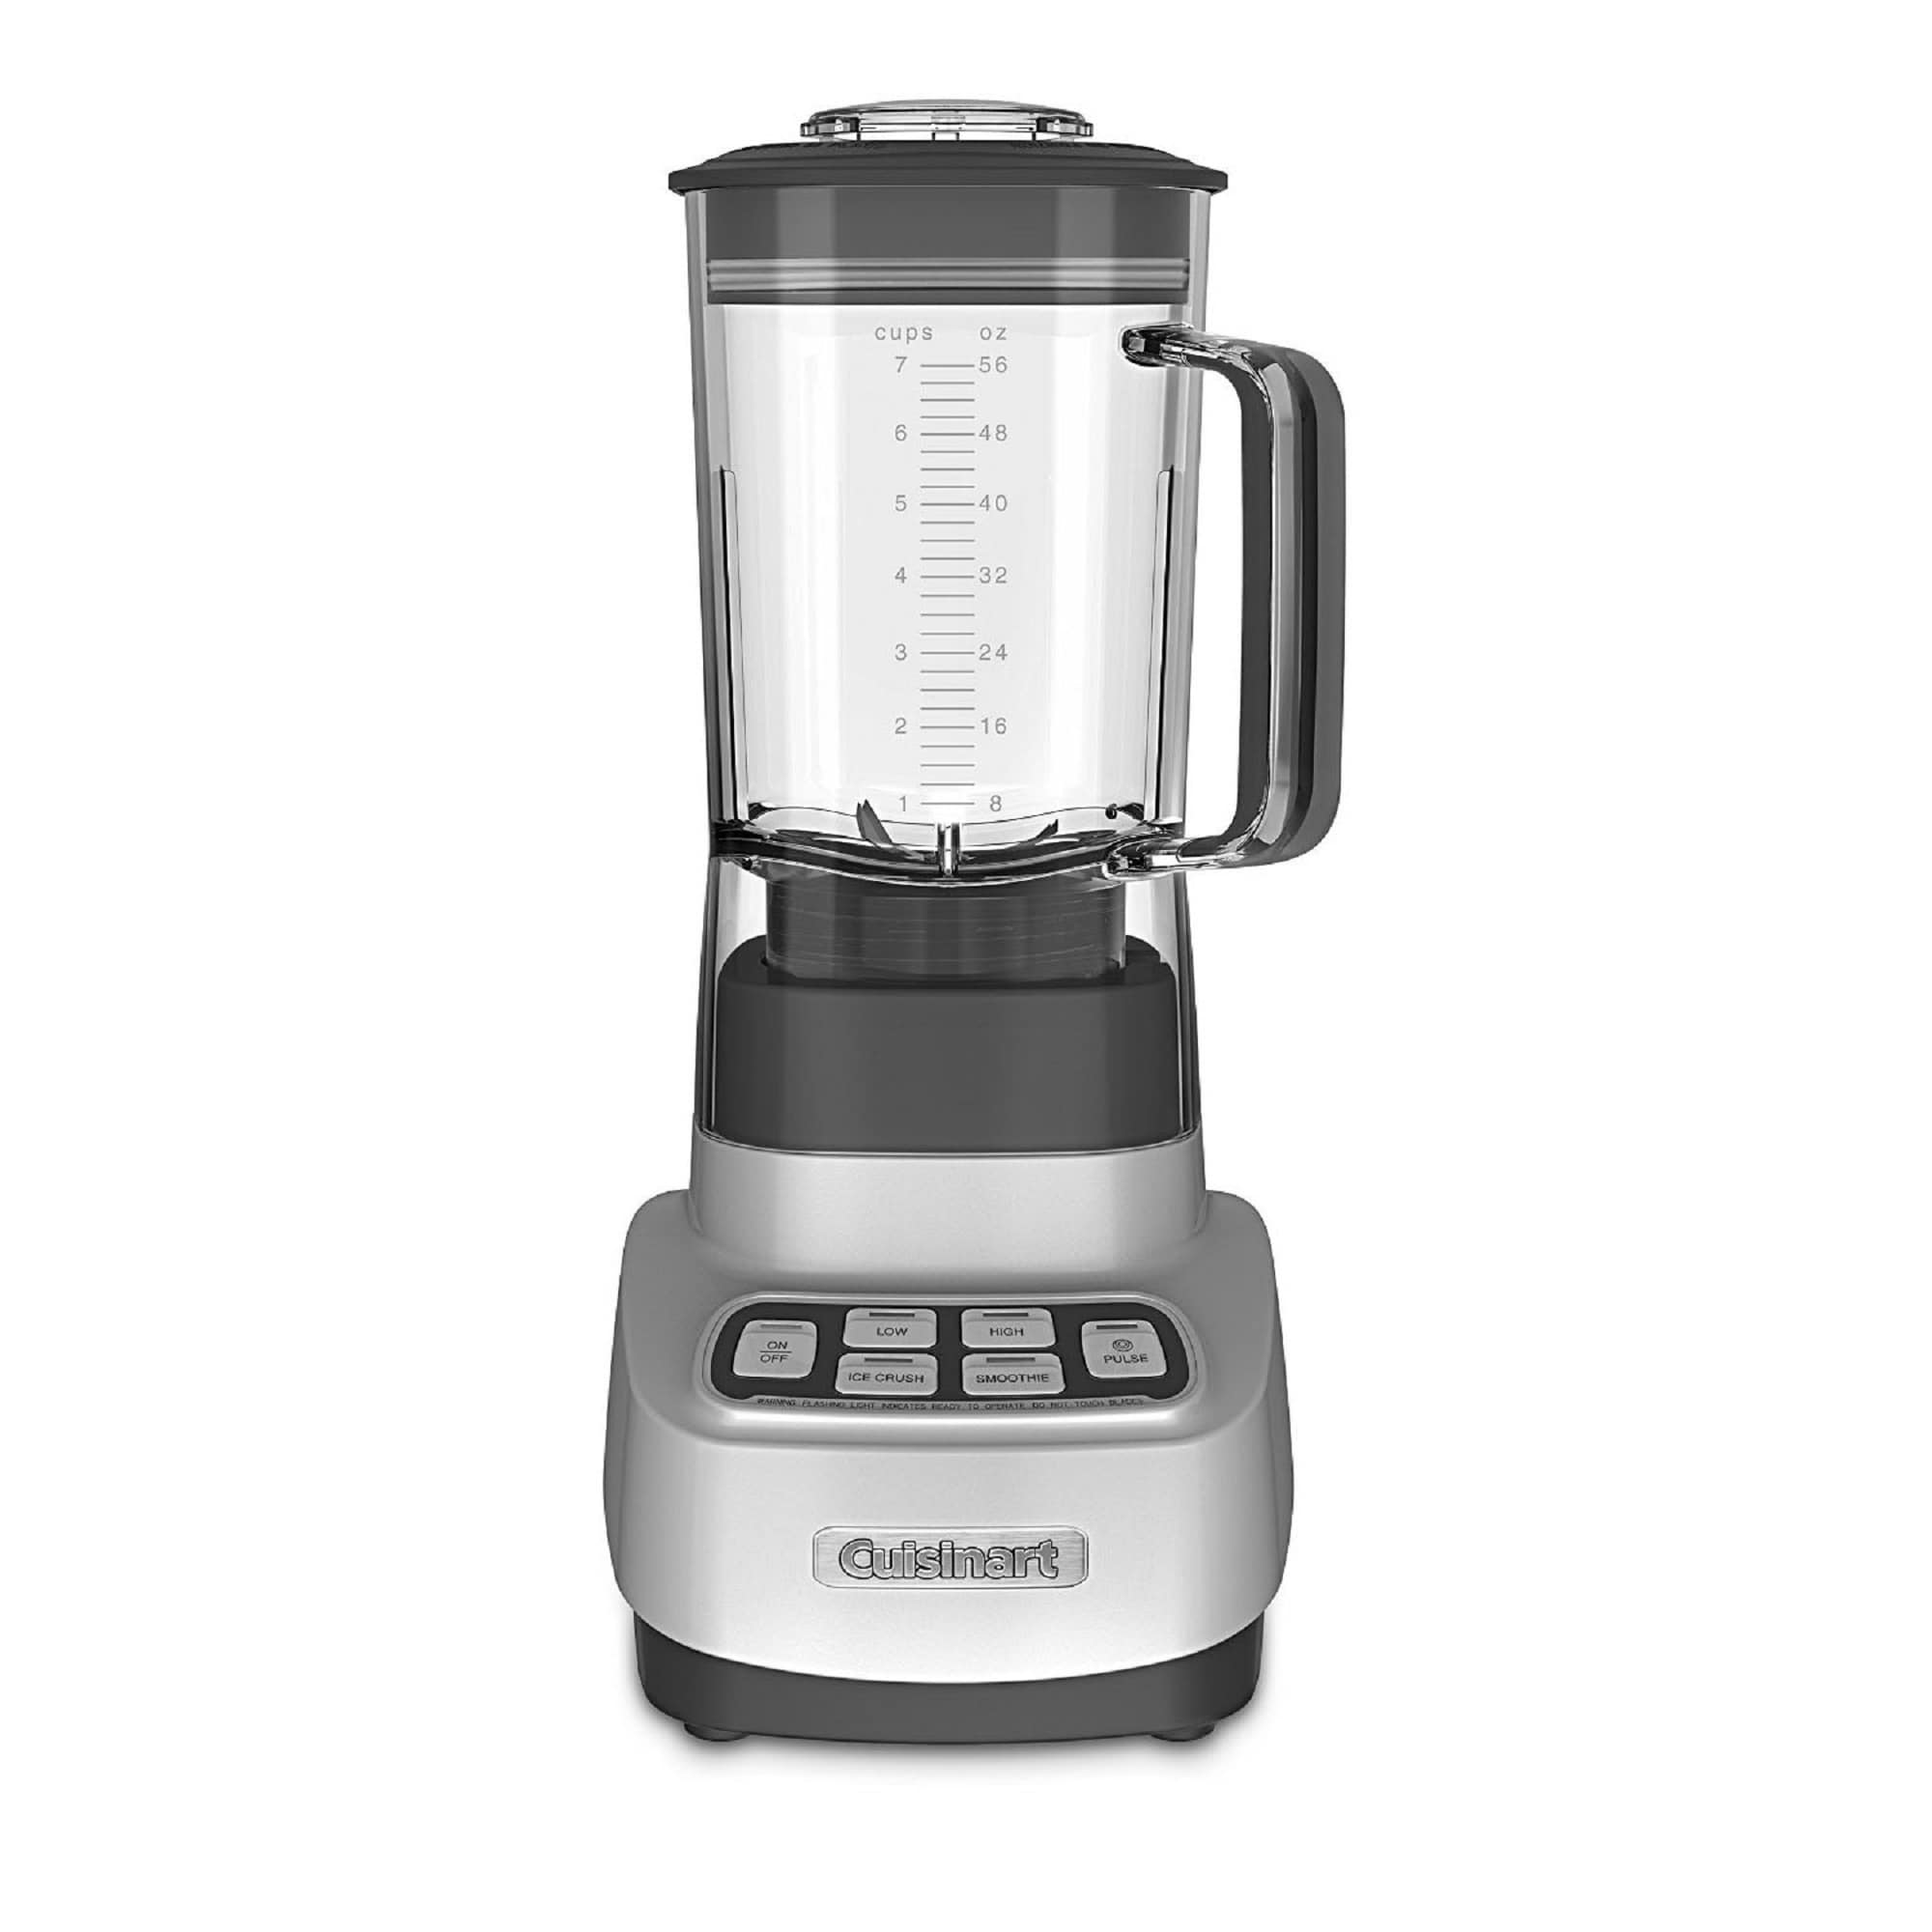 Cuisinart 5-Speed Stainless Steel Immersion Blender with Accessory Jar at